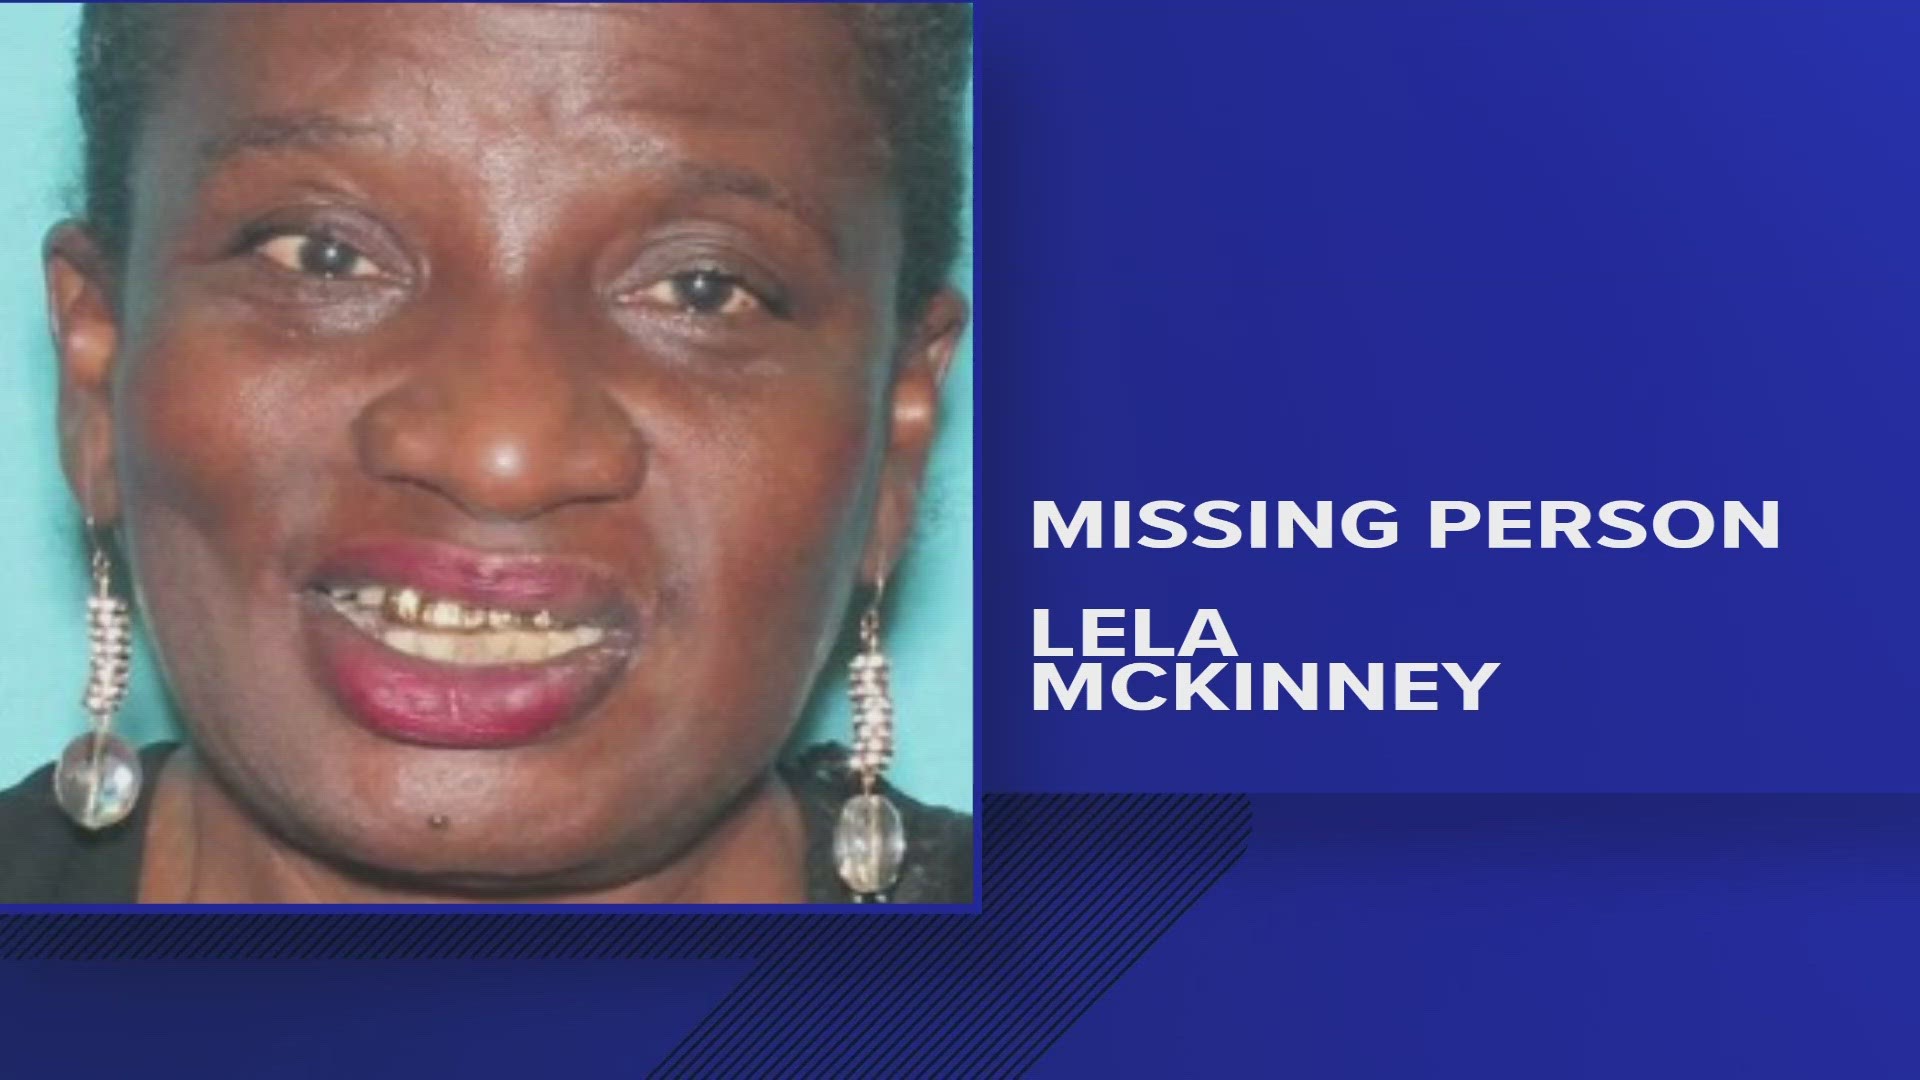 65-year-old Lela McKinney reportedly went missing from the Dallas area on Aug. 3. Police believe she may be in Waco.